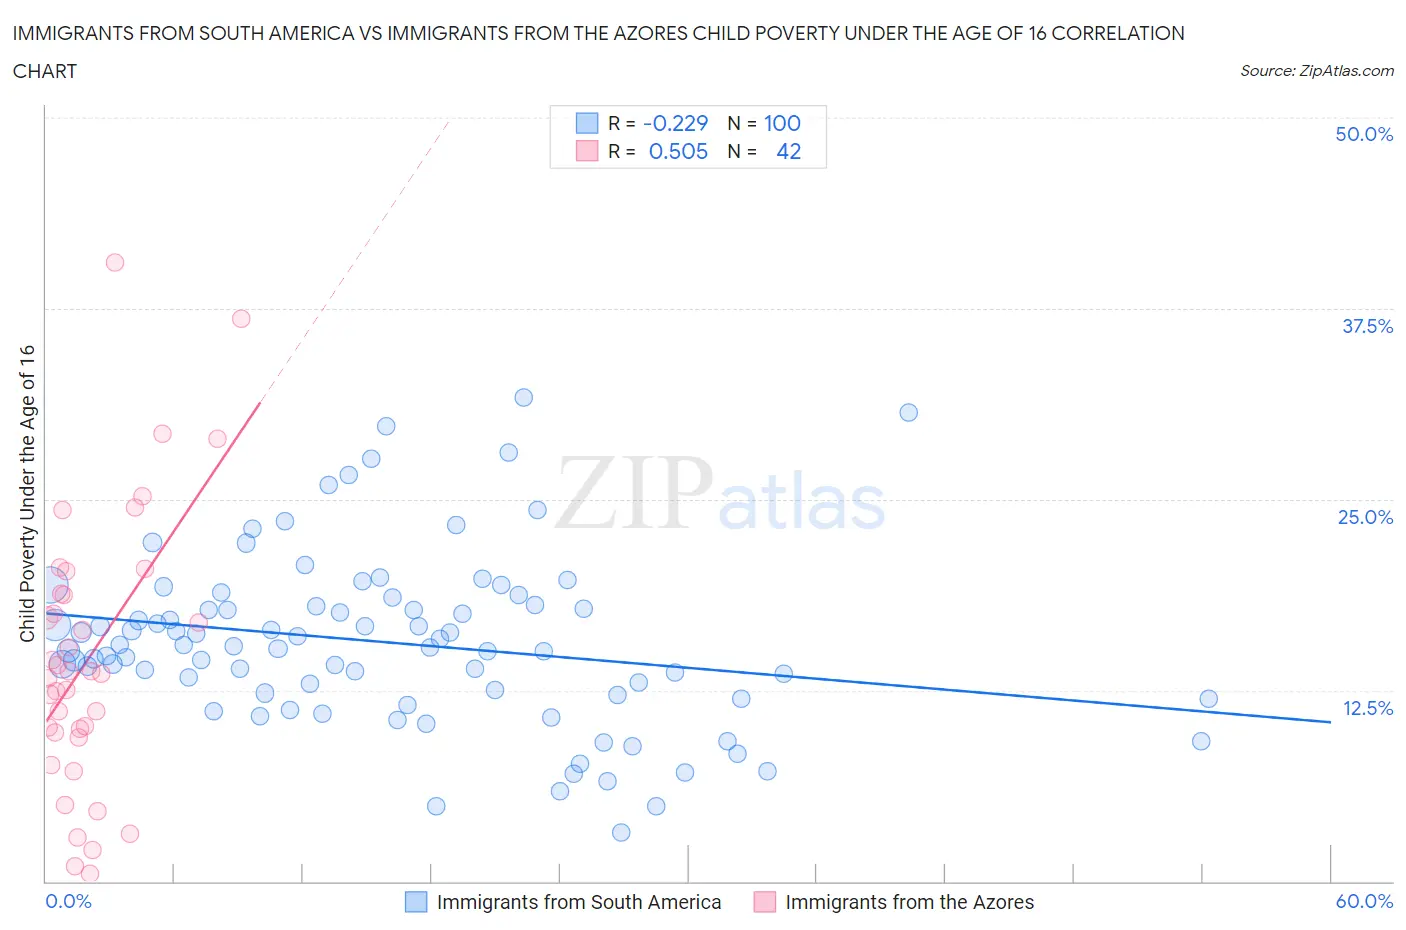 Immigrants from South America vs Immigrants from the Azores Child Poverty Under the Age of 16